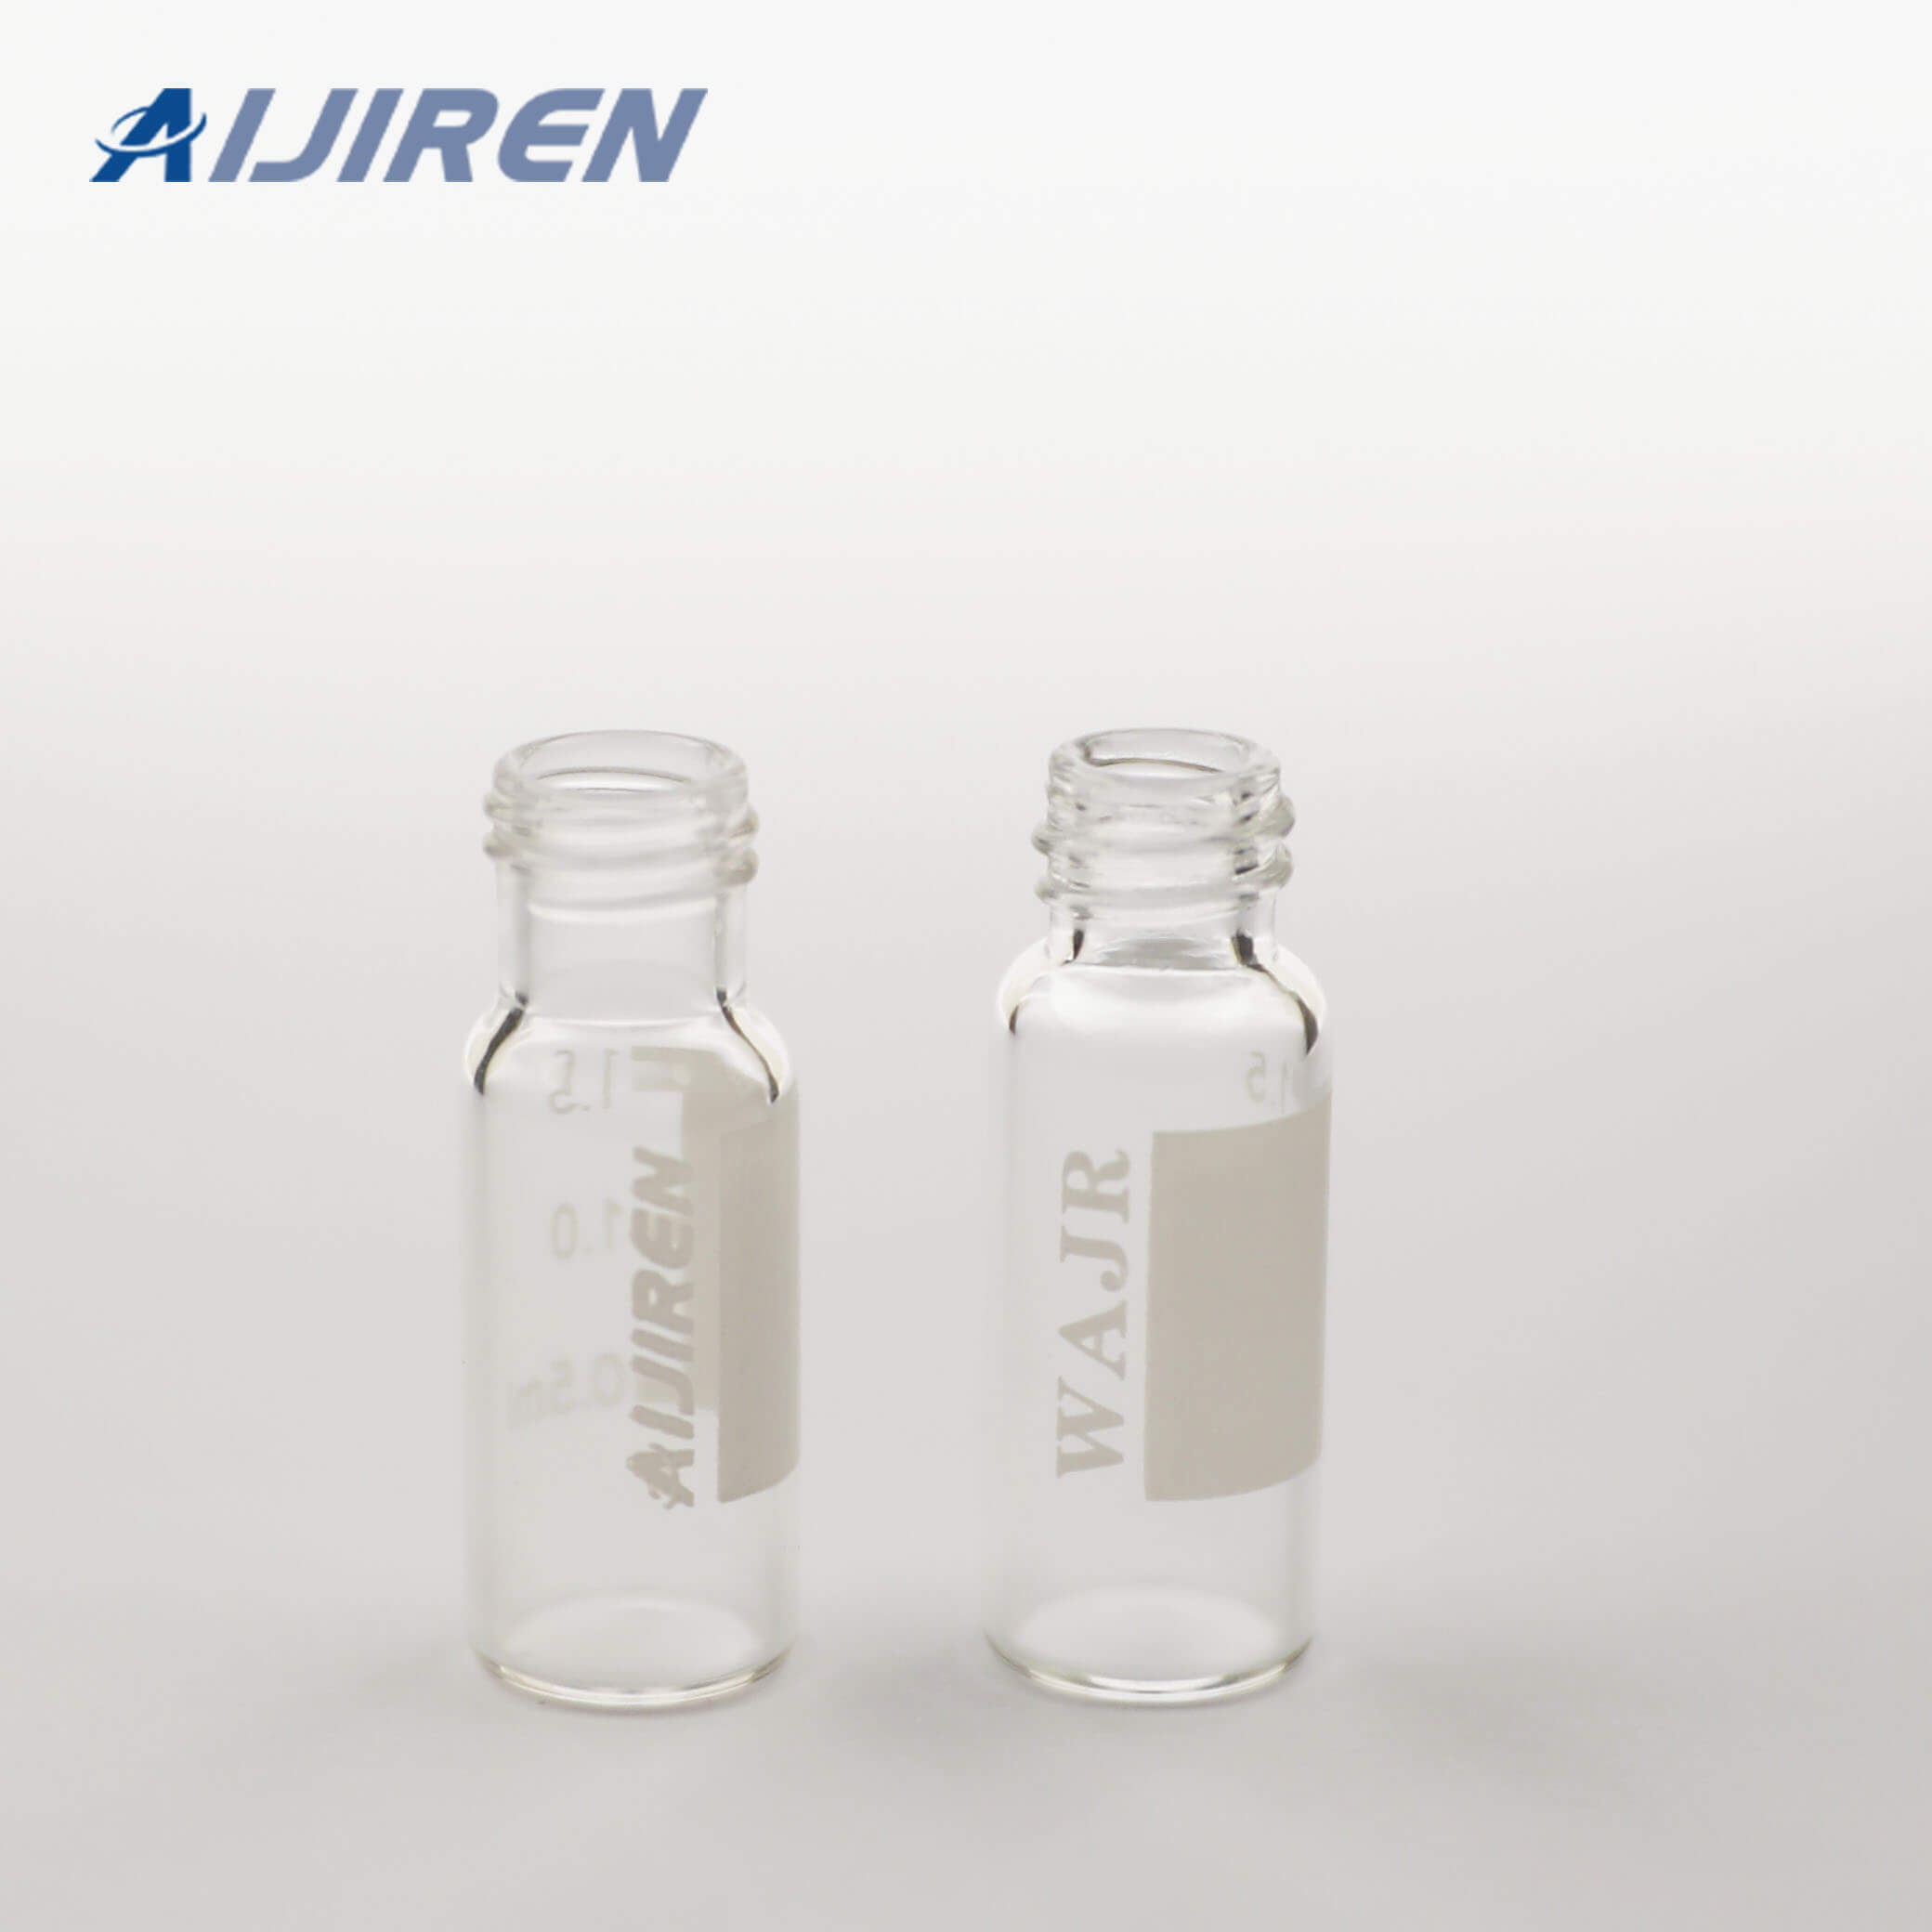 2ml 8mm Clear Glass Vials for WATERS